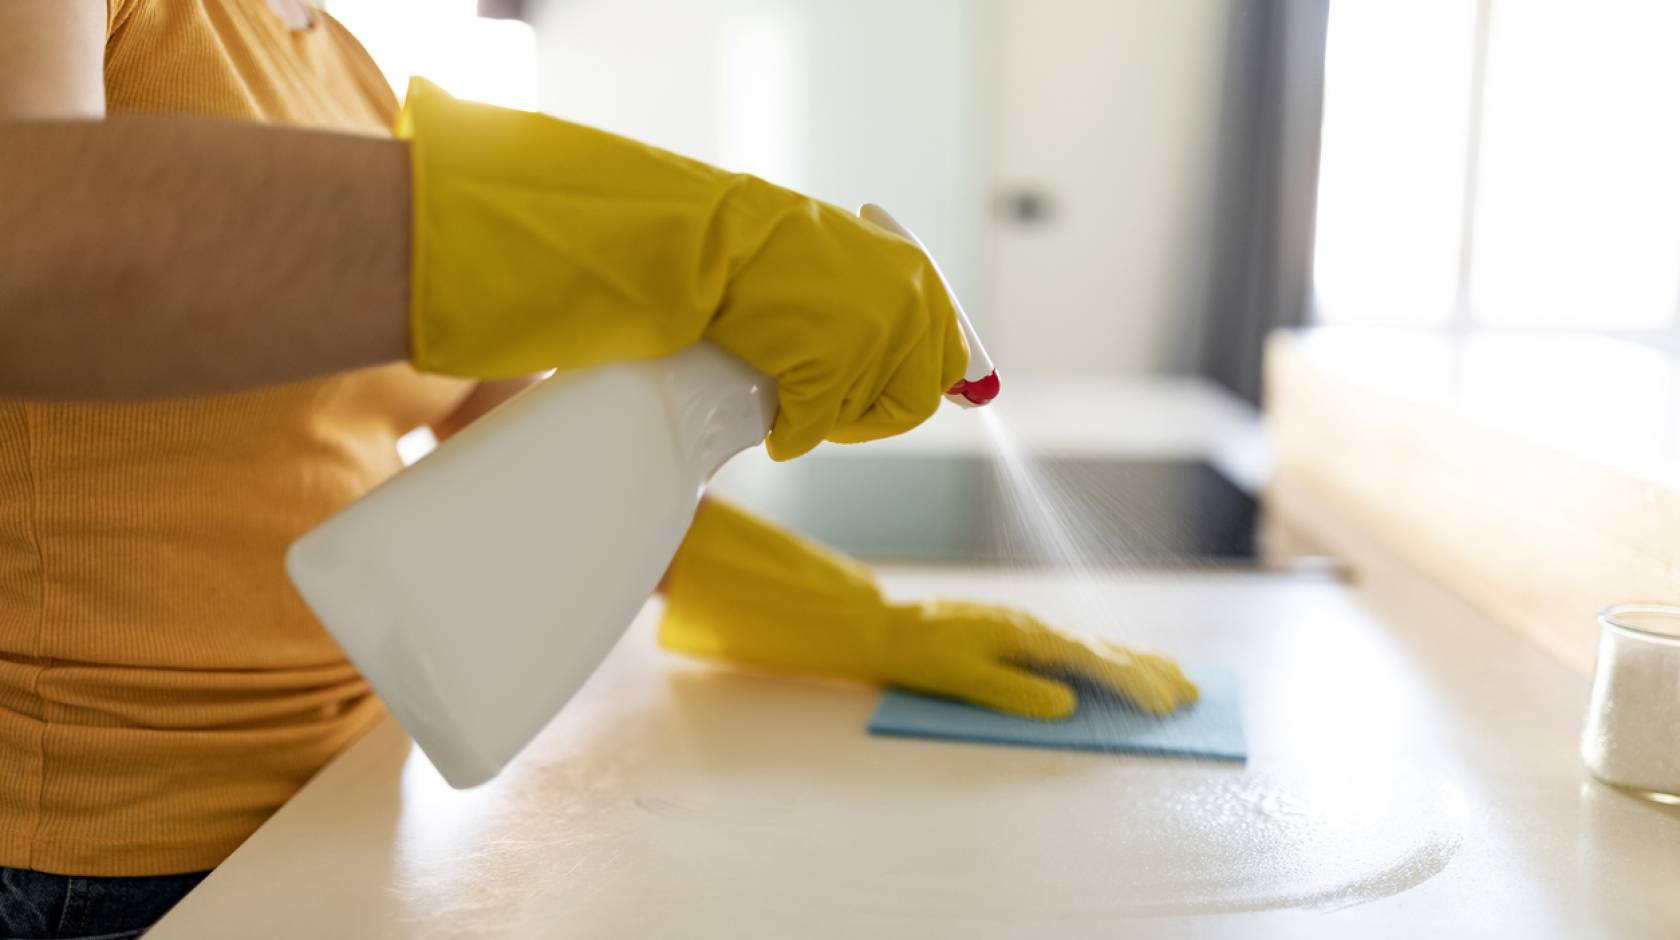 Person wearing yellow rubber gloves sprays cleaner on a countertop and wipes it with a sponge